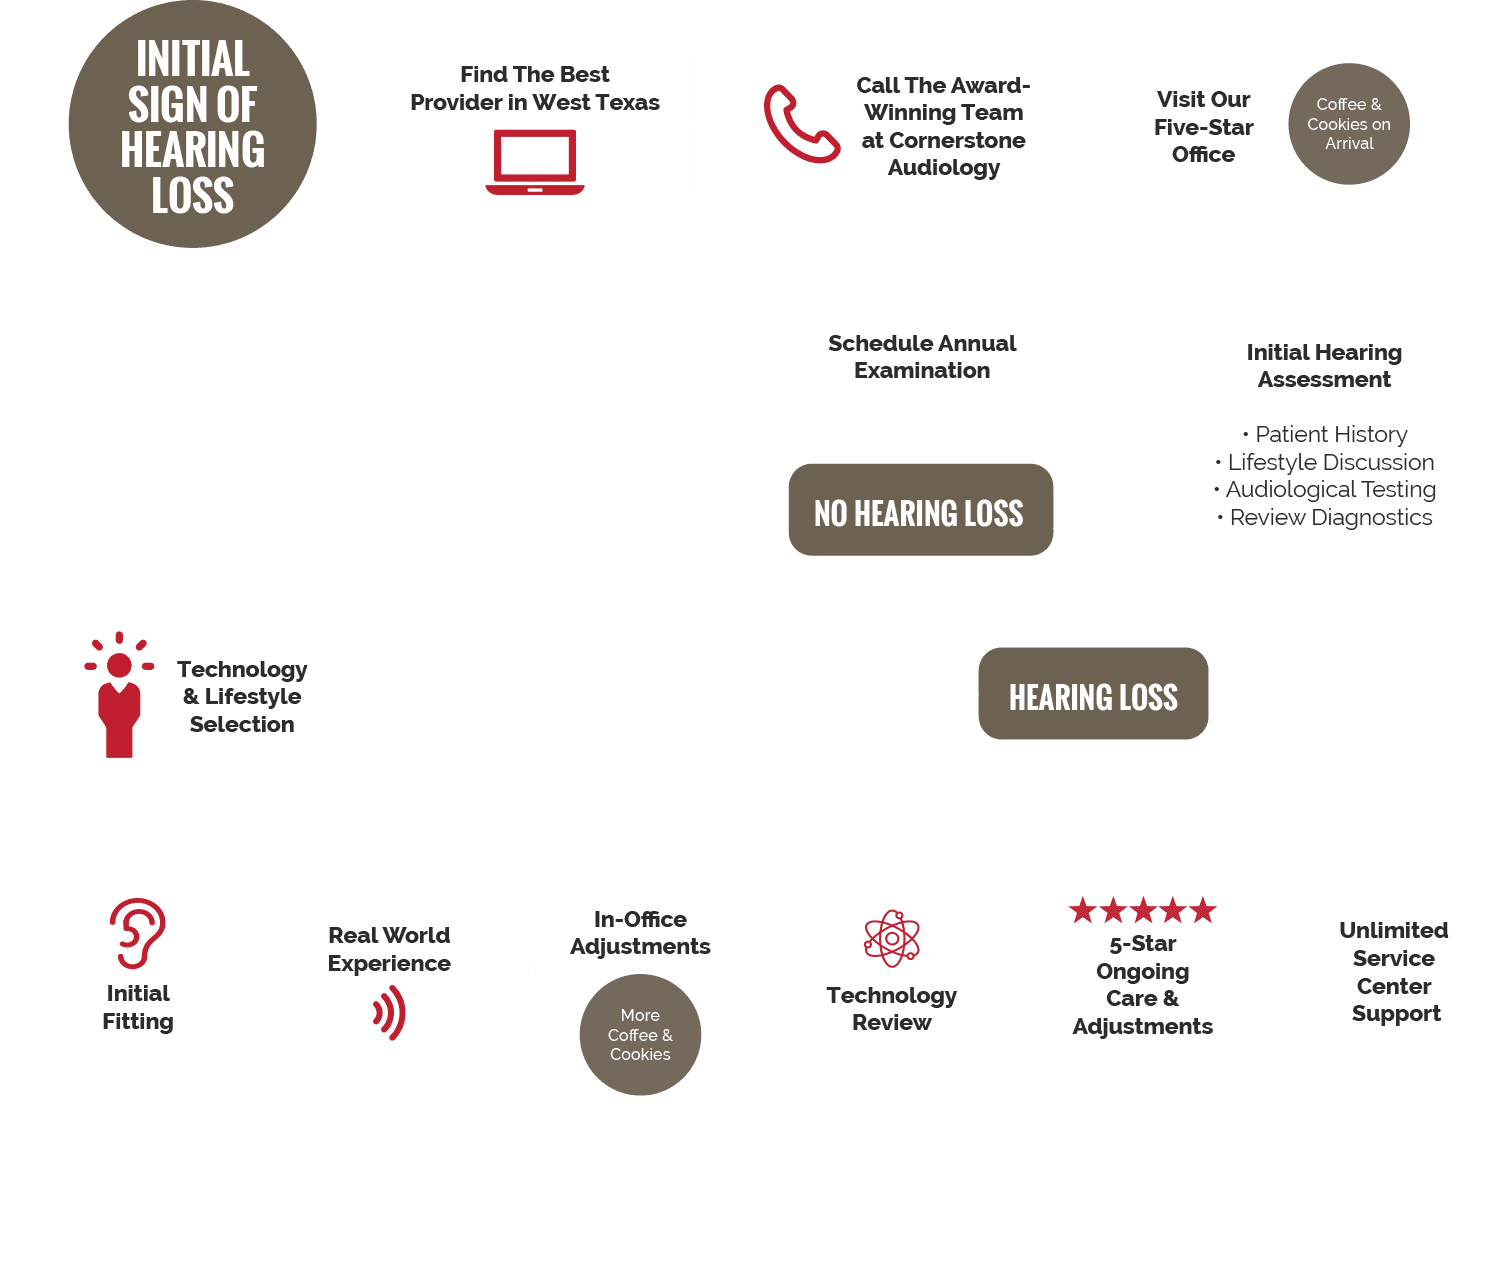 Cornerstone Audiology image showing journey to better hearing